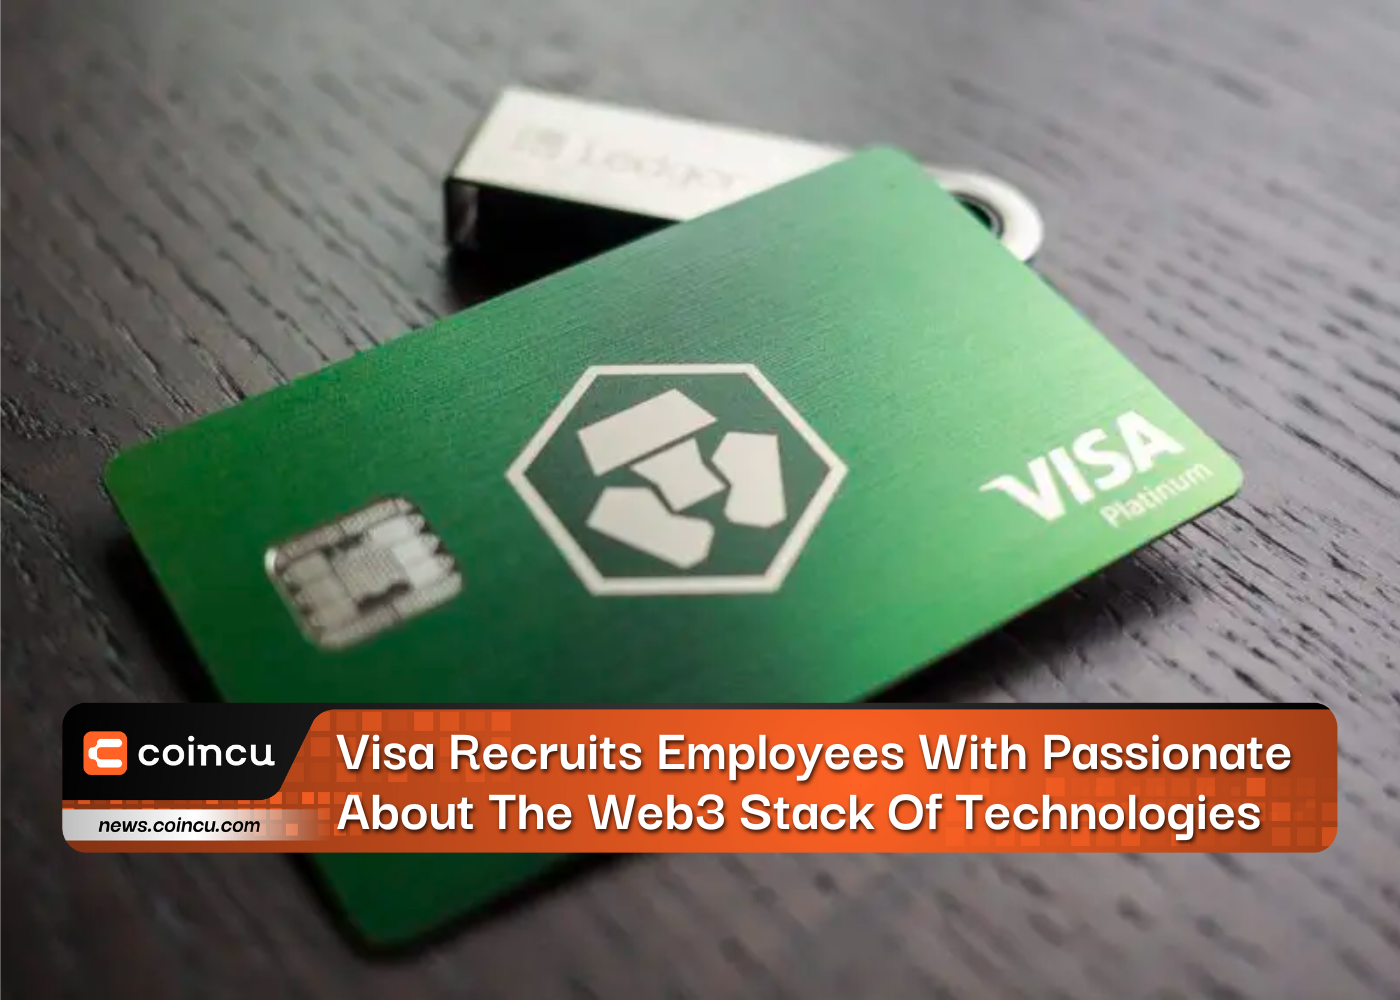 Visa Recruits Employees With Passionate About The Web3 Stack Of Technologies